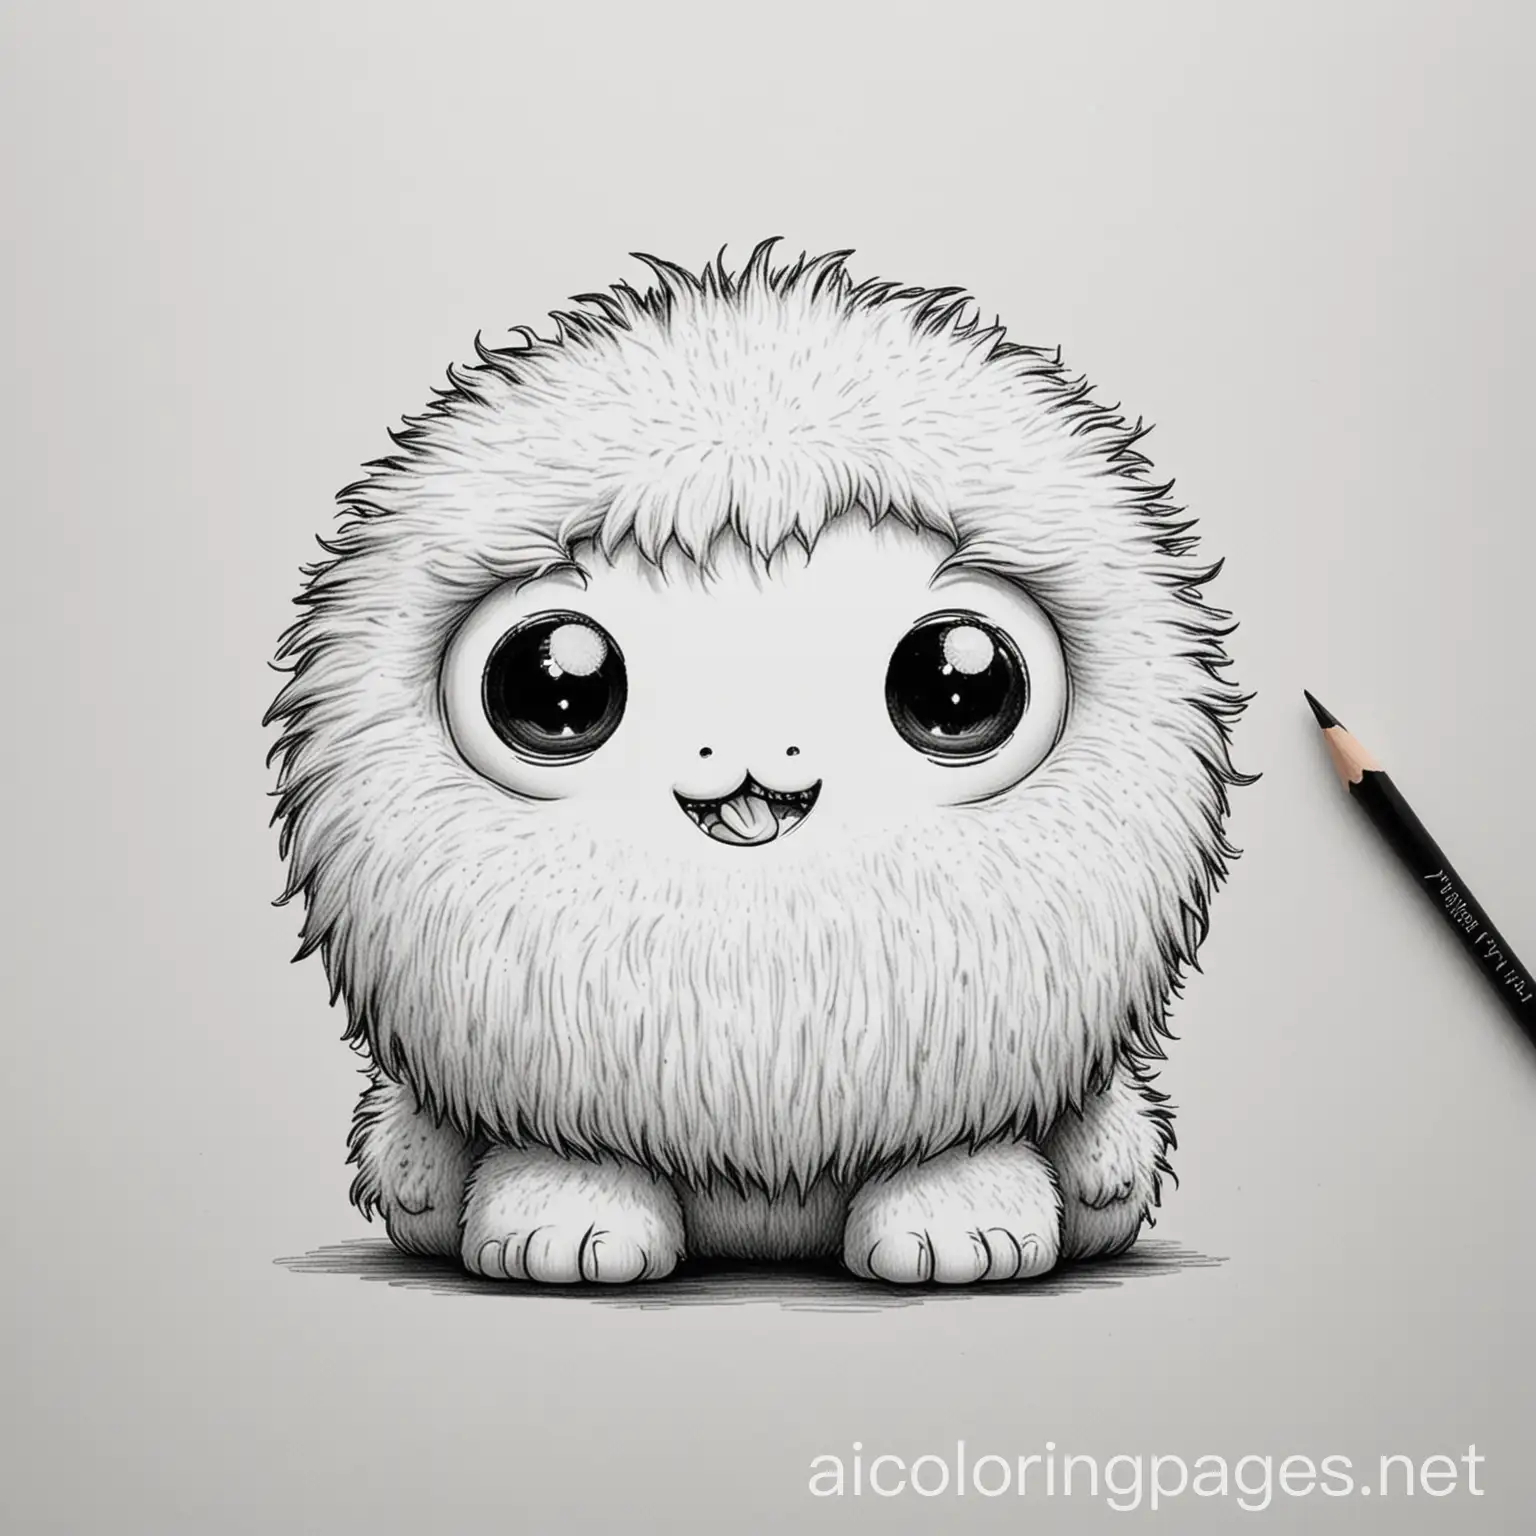 A small, round fuzzy monster with soft fur in pastel colours. Snuggle bug is shy but loves giving hugs and cuddling up with friends. It has big, round eyes and floppy ears. Coloring Page, black and white, line art, white background, Simplicity, Ample White Space. The background of the colouring page is plain white to make it easy for young children to colour within the lines. The outlines of all the subjects are easy to distinguish, making it simple for kids to colour without too much difficulty ,, Coloring Page, black and white, line art, white background, Simplicity, Ample White Space. The background of the coloring page is plain white to make it easy for young children to color within the lines. The outlines of all the subjects are easy to distinguish, making it simple for kids to color without too much difficulty